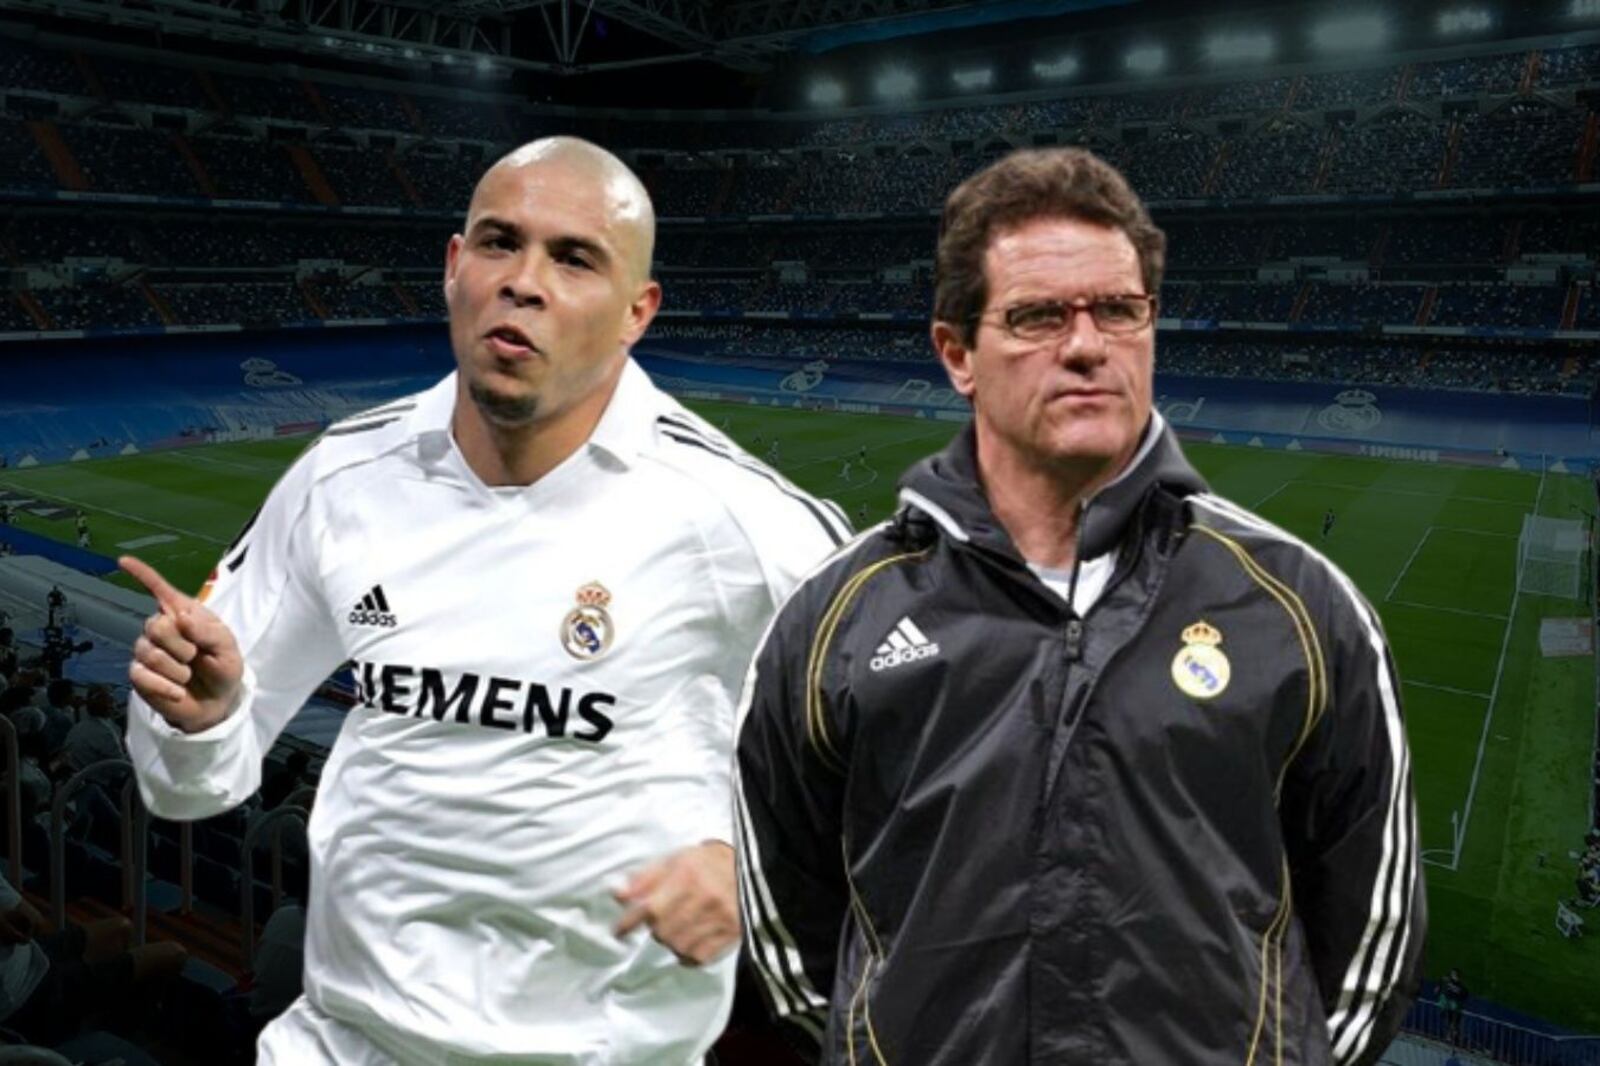 Because of Capello he was fired, the details of his relationship with Ronaldo